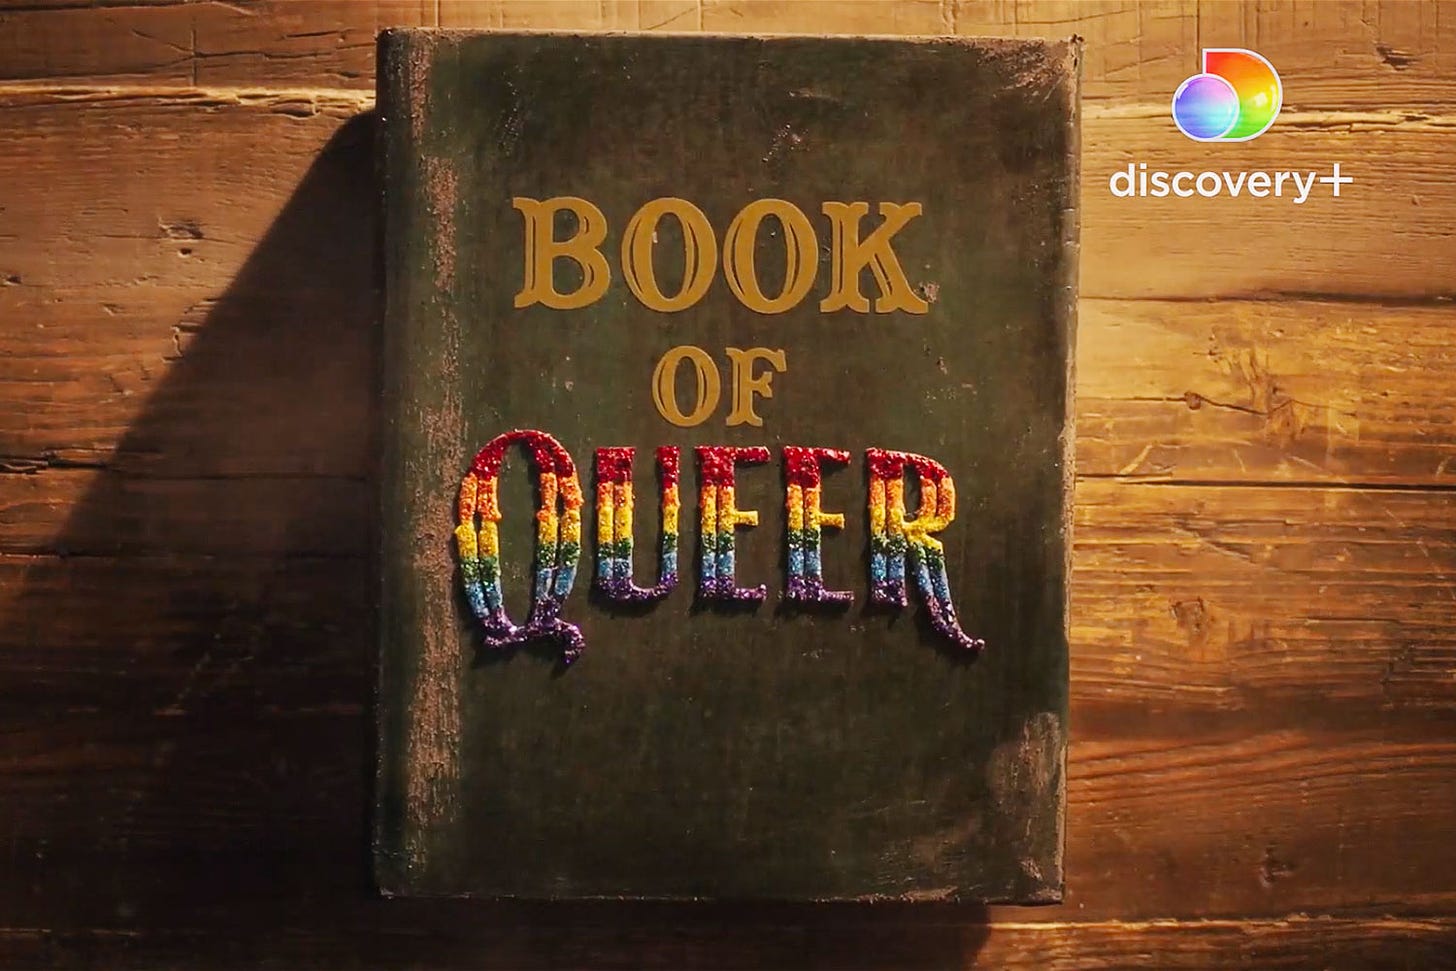 The Book of Queer' preview trailer | EW.com